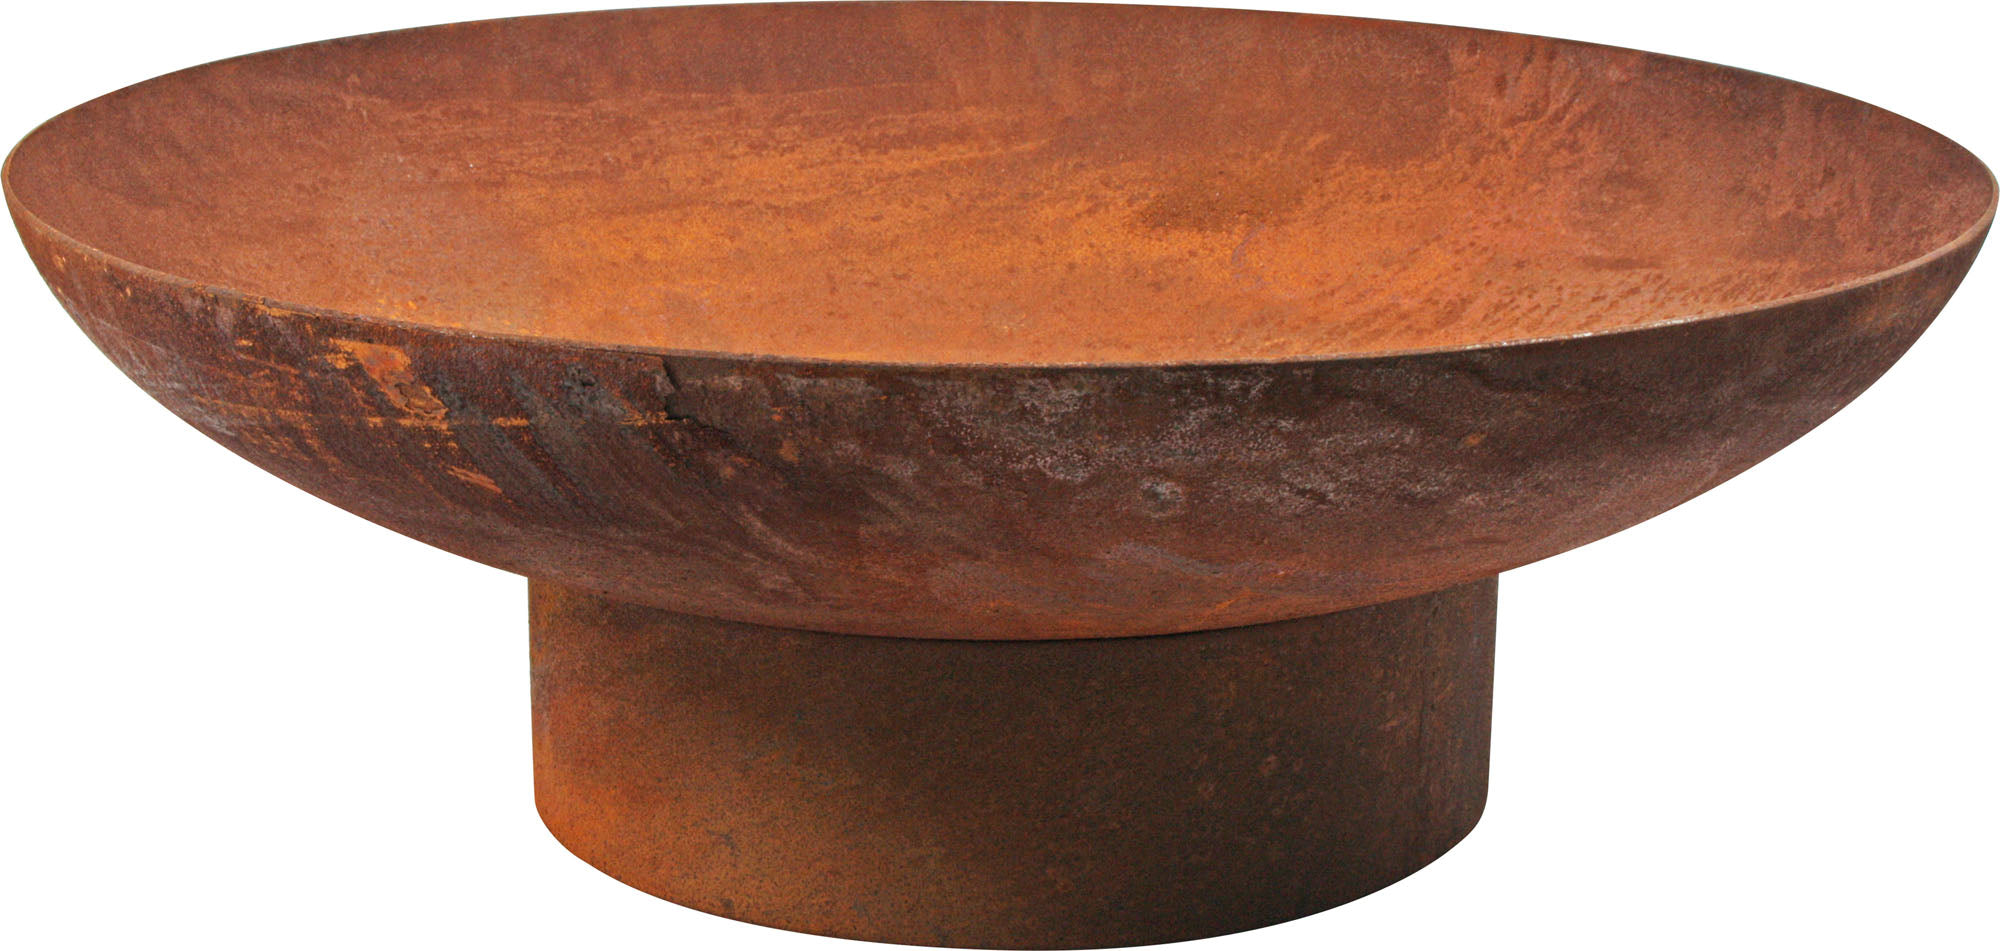 70cm HEAVY DUTY RUST EFFECT ROUND FIRE PIT WITH BASE